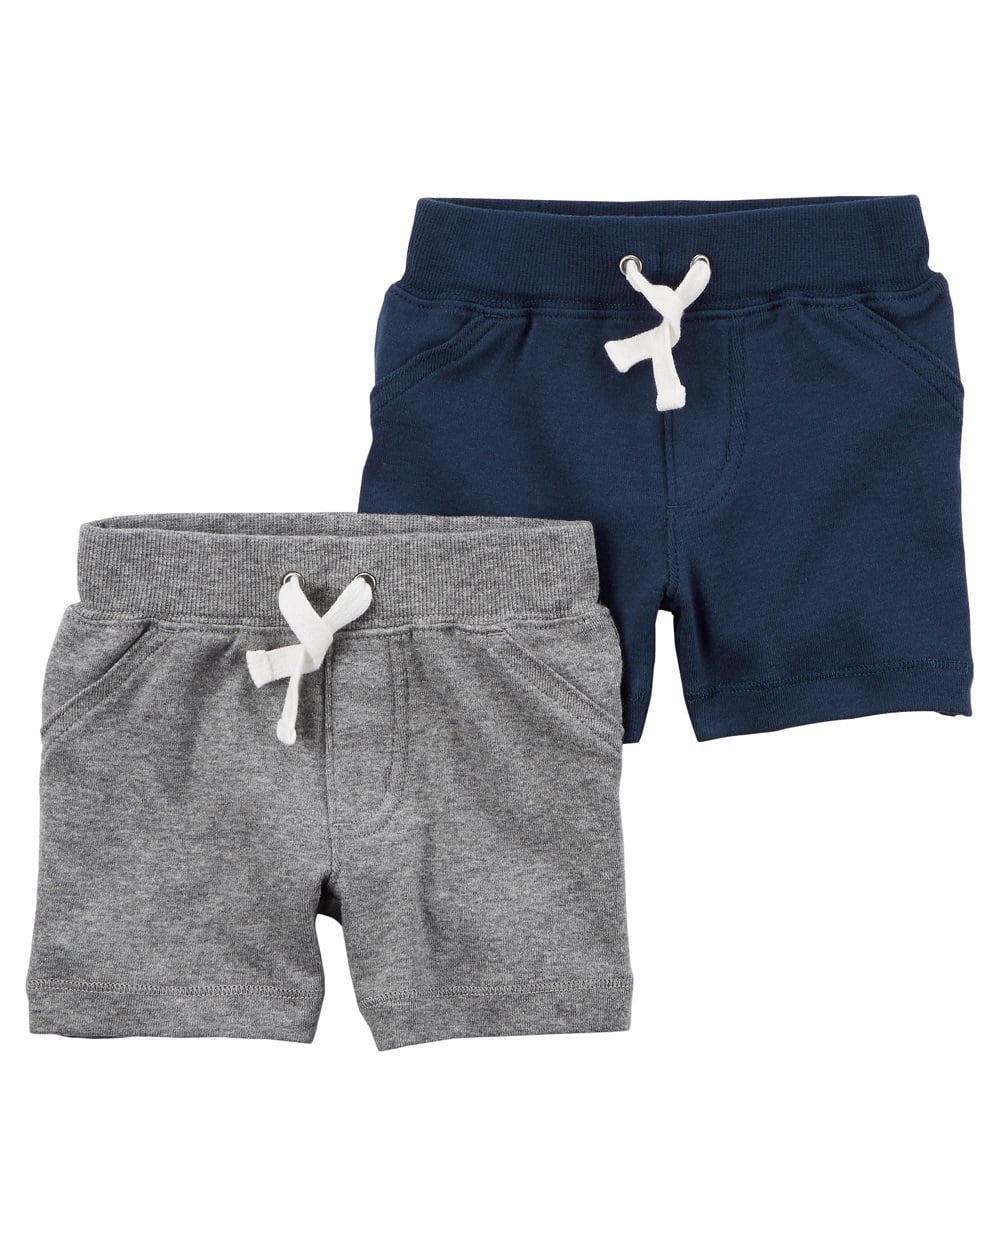 Carters Baby Boys 2-Pack Shorts 24 Months Blue//Gray